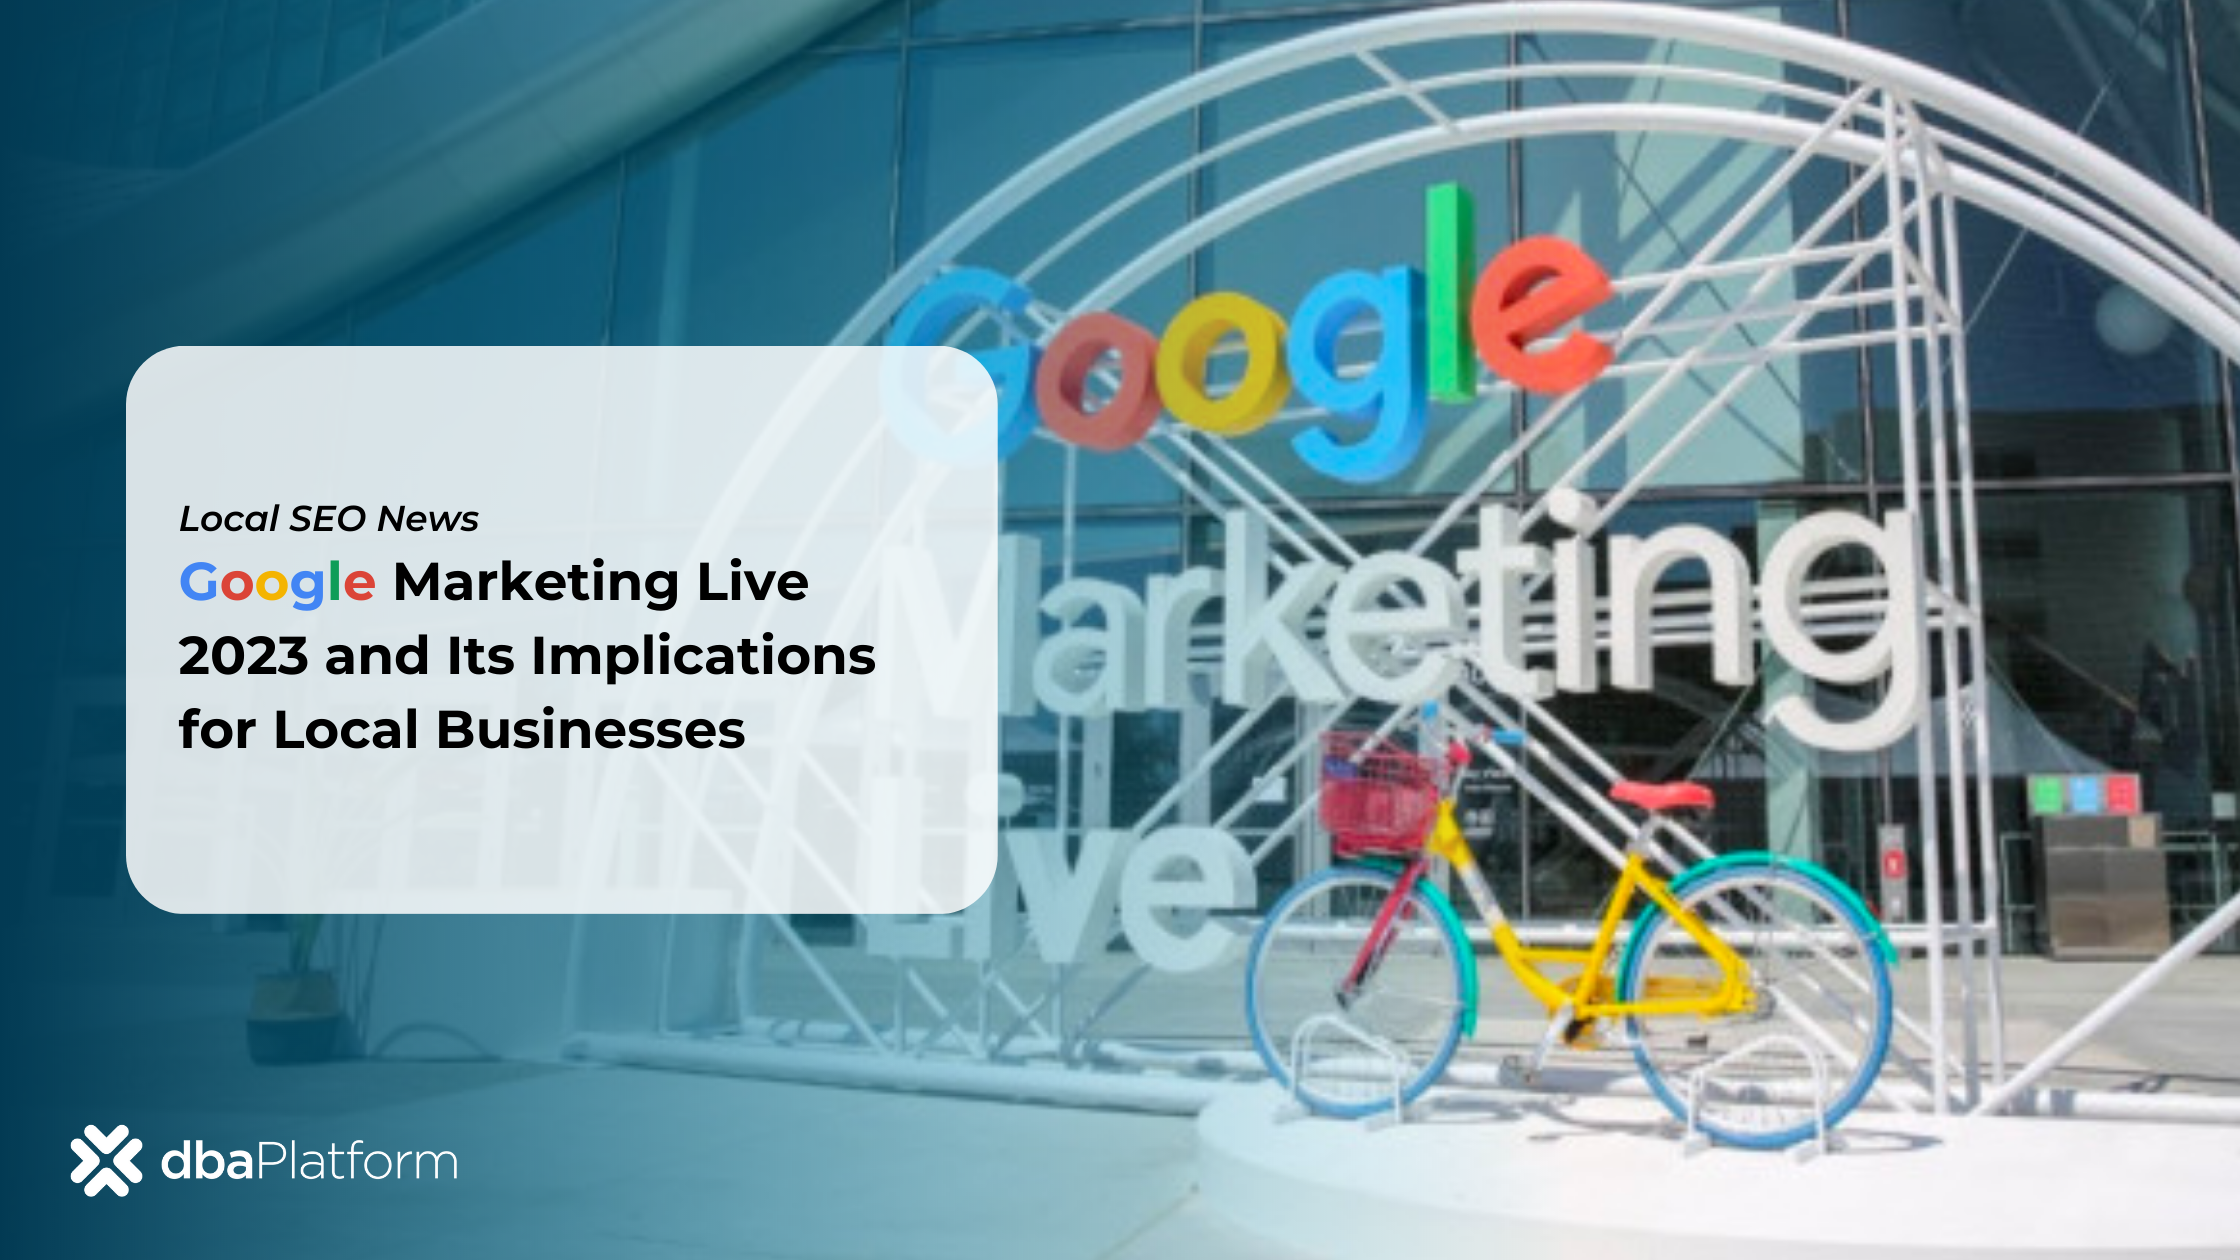 Google Marketing Live 2023 for Local Retailers